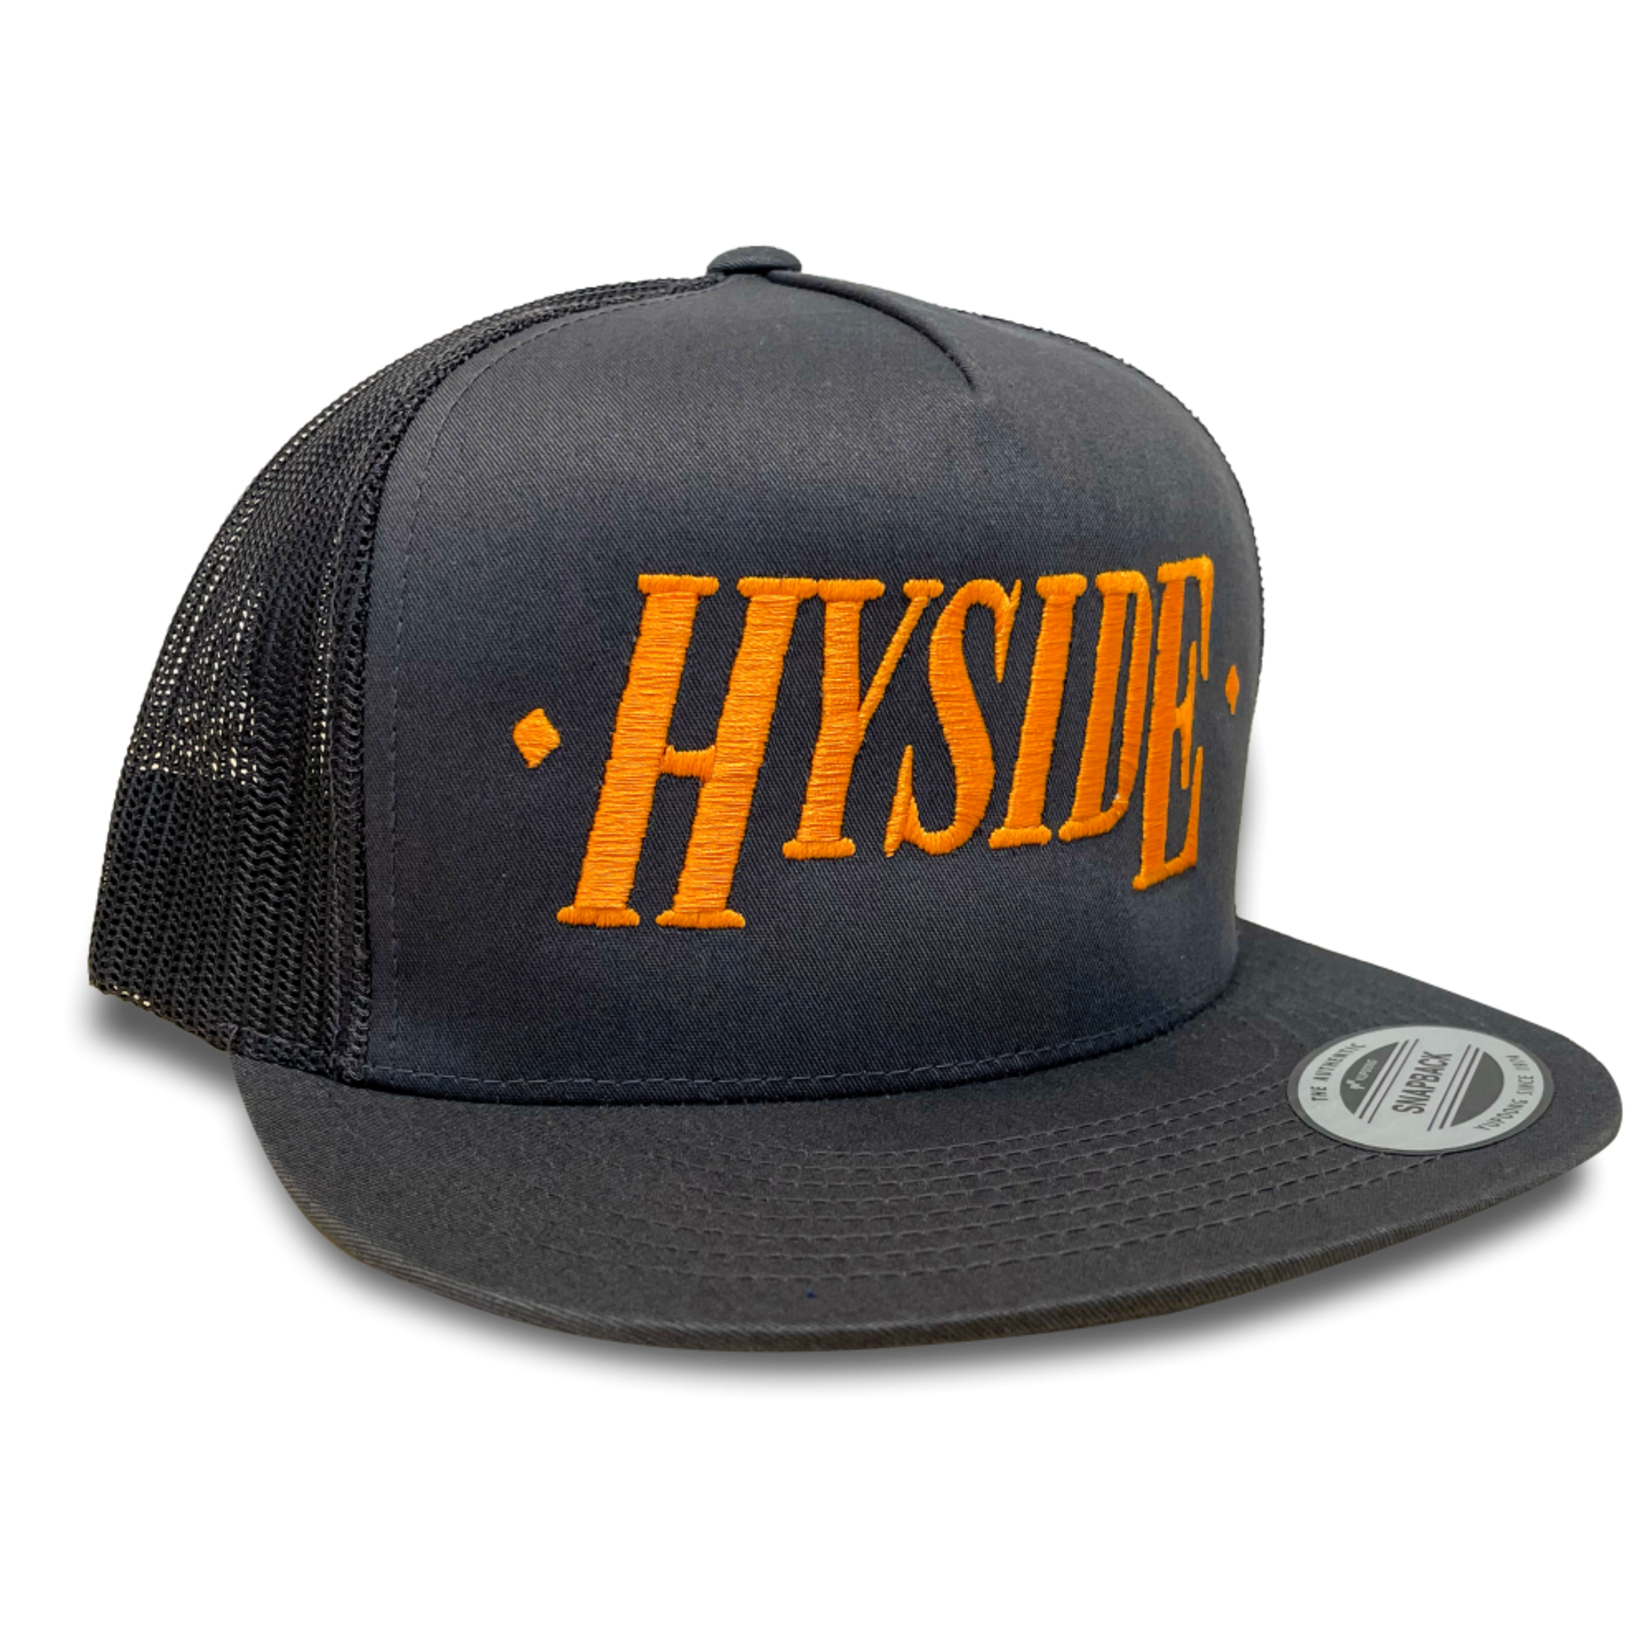 Hyside Inflatables Hyside Hats